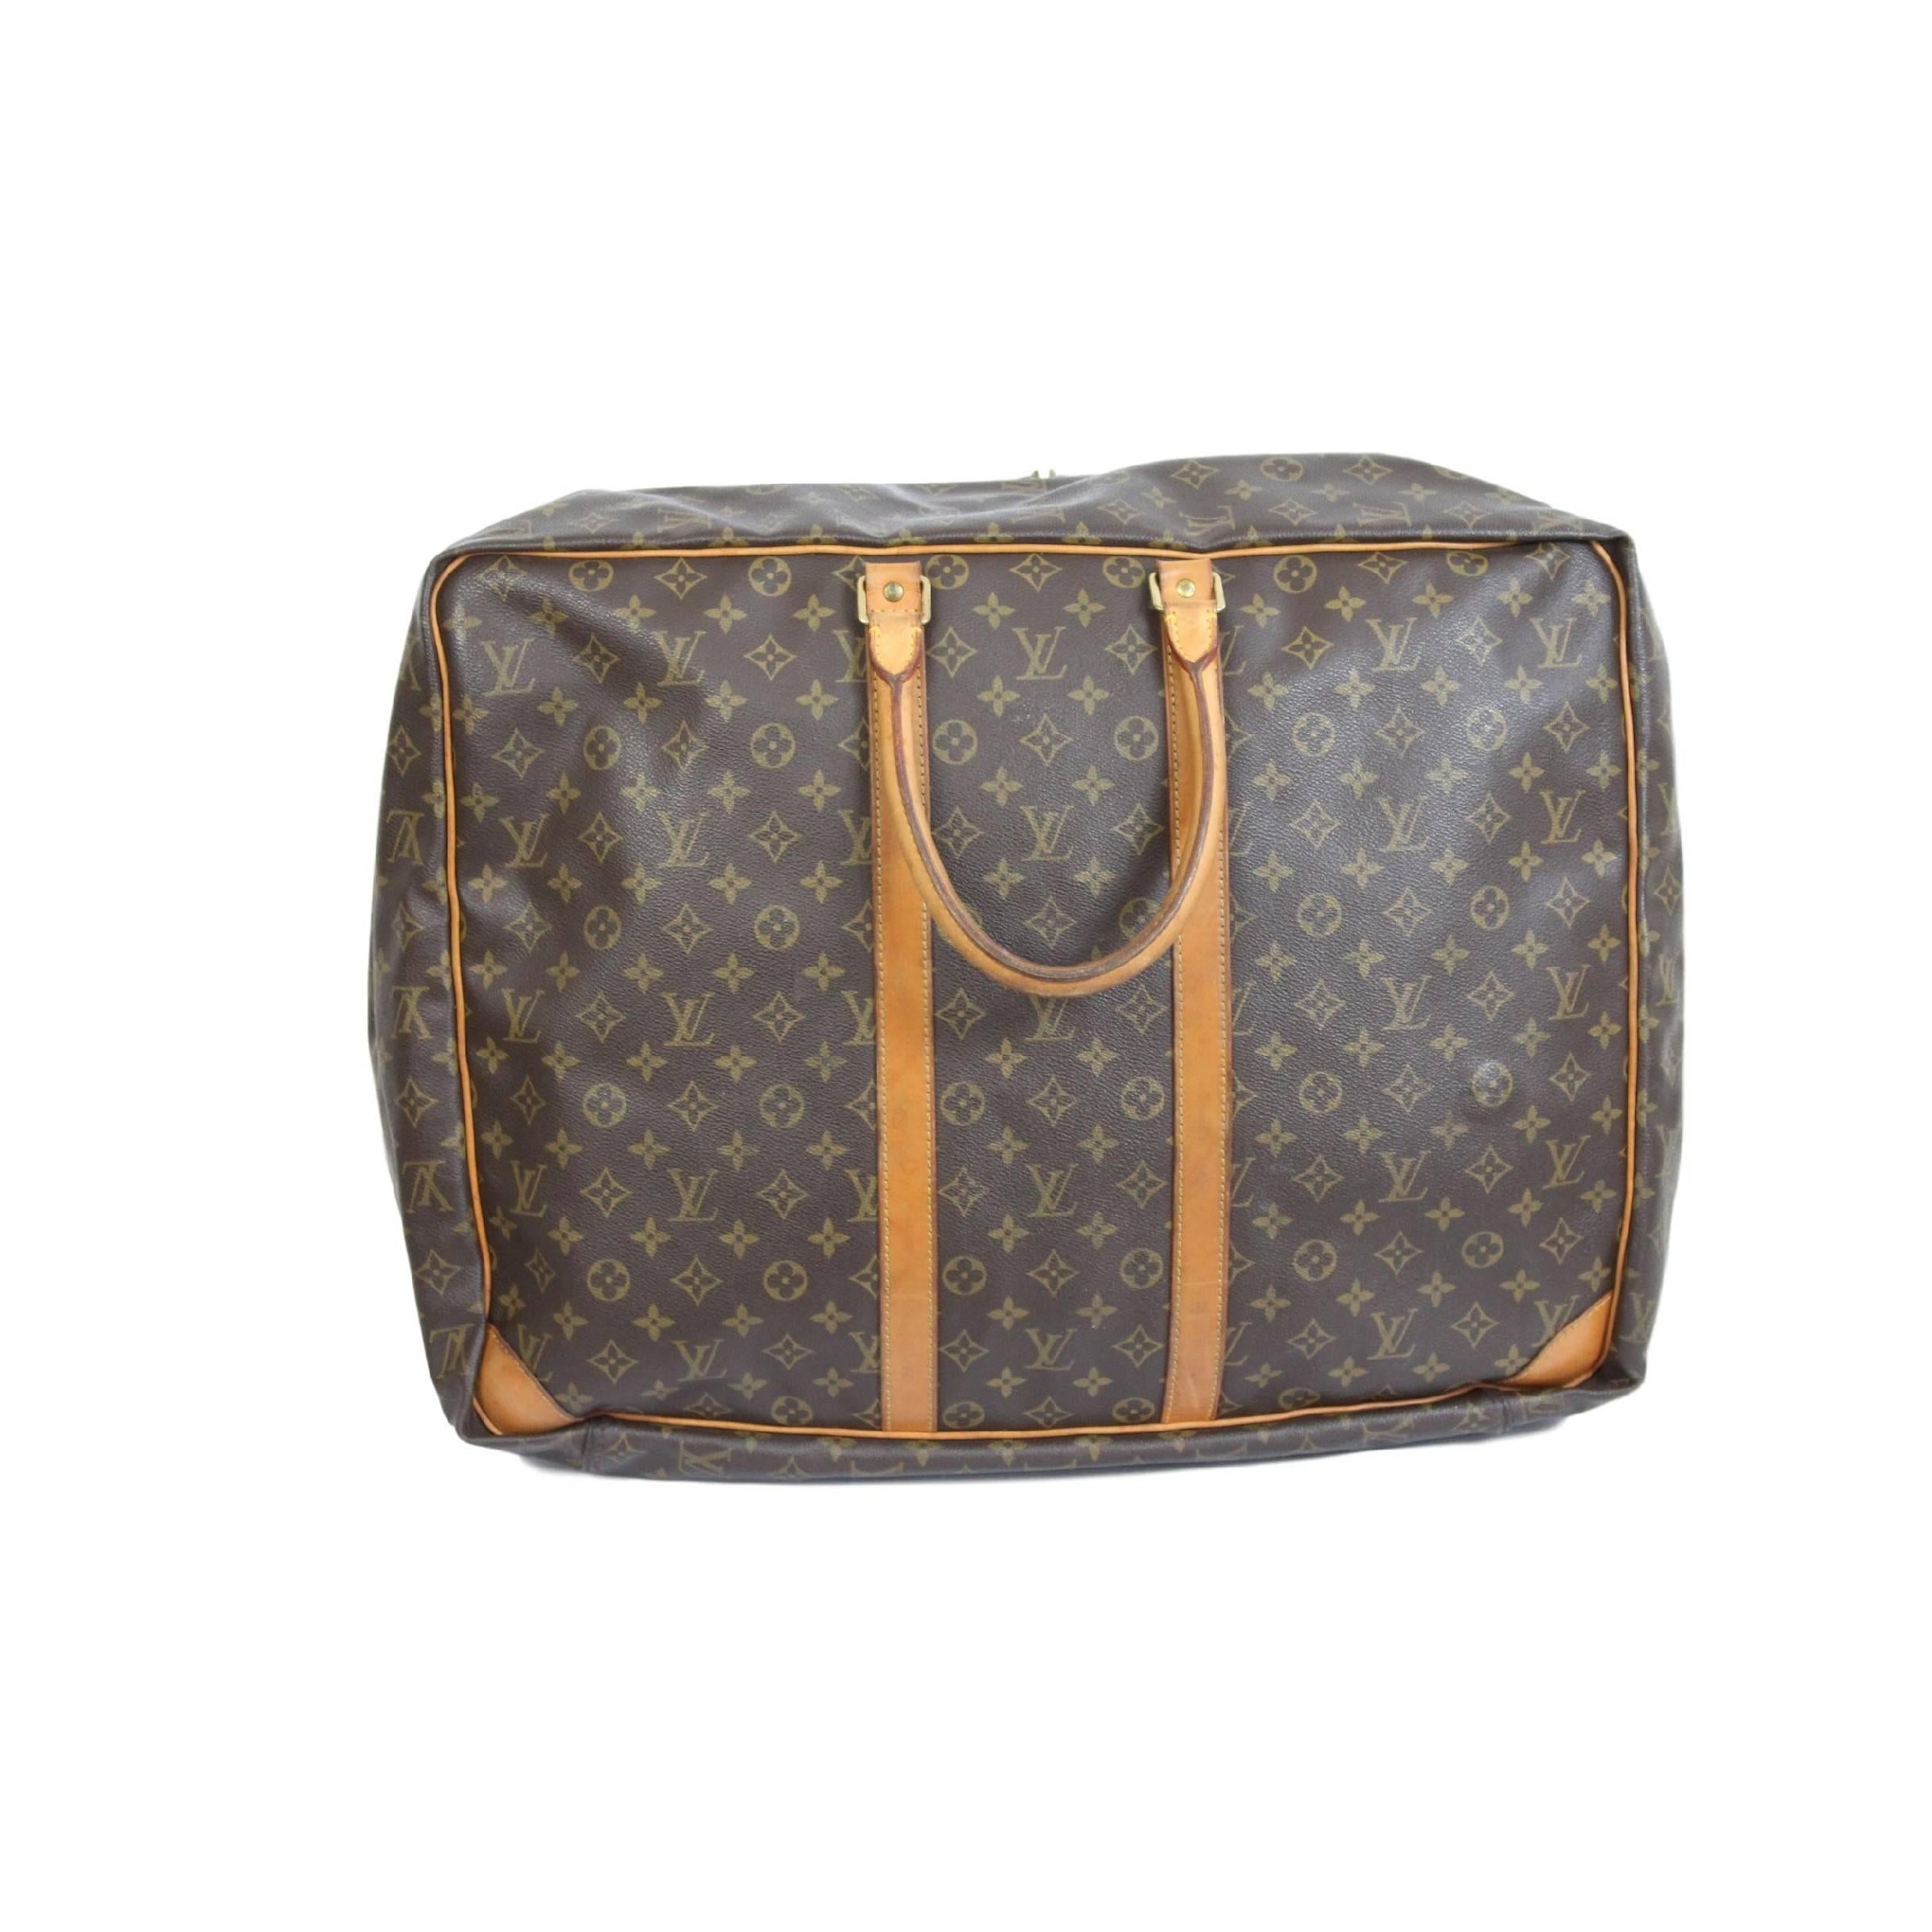 Vintage travel bag authentic Louis Vuitton monogram Brown 55, Sirius. The Interior is in excellent condition, two straps with buckles to keep branded clothes. The details are in gilt metal. SP1906 authentication code, then realized in France in the